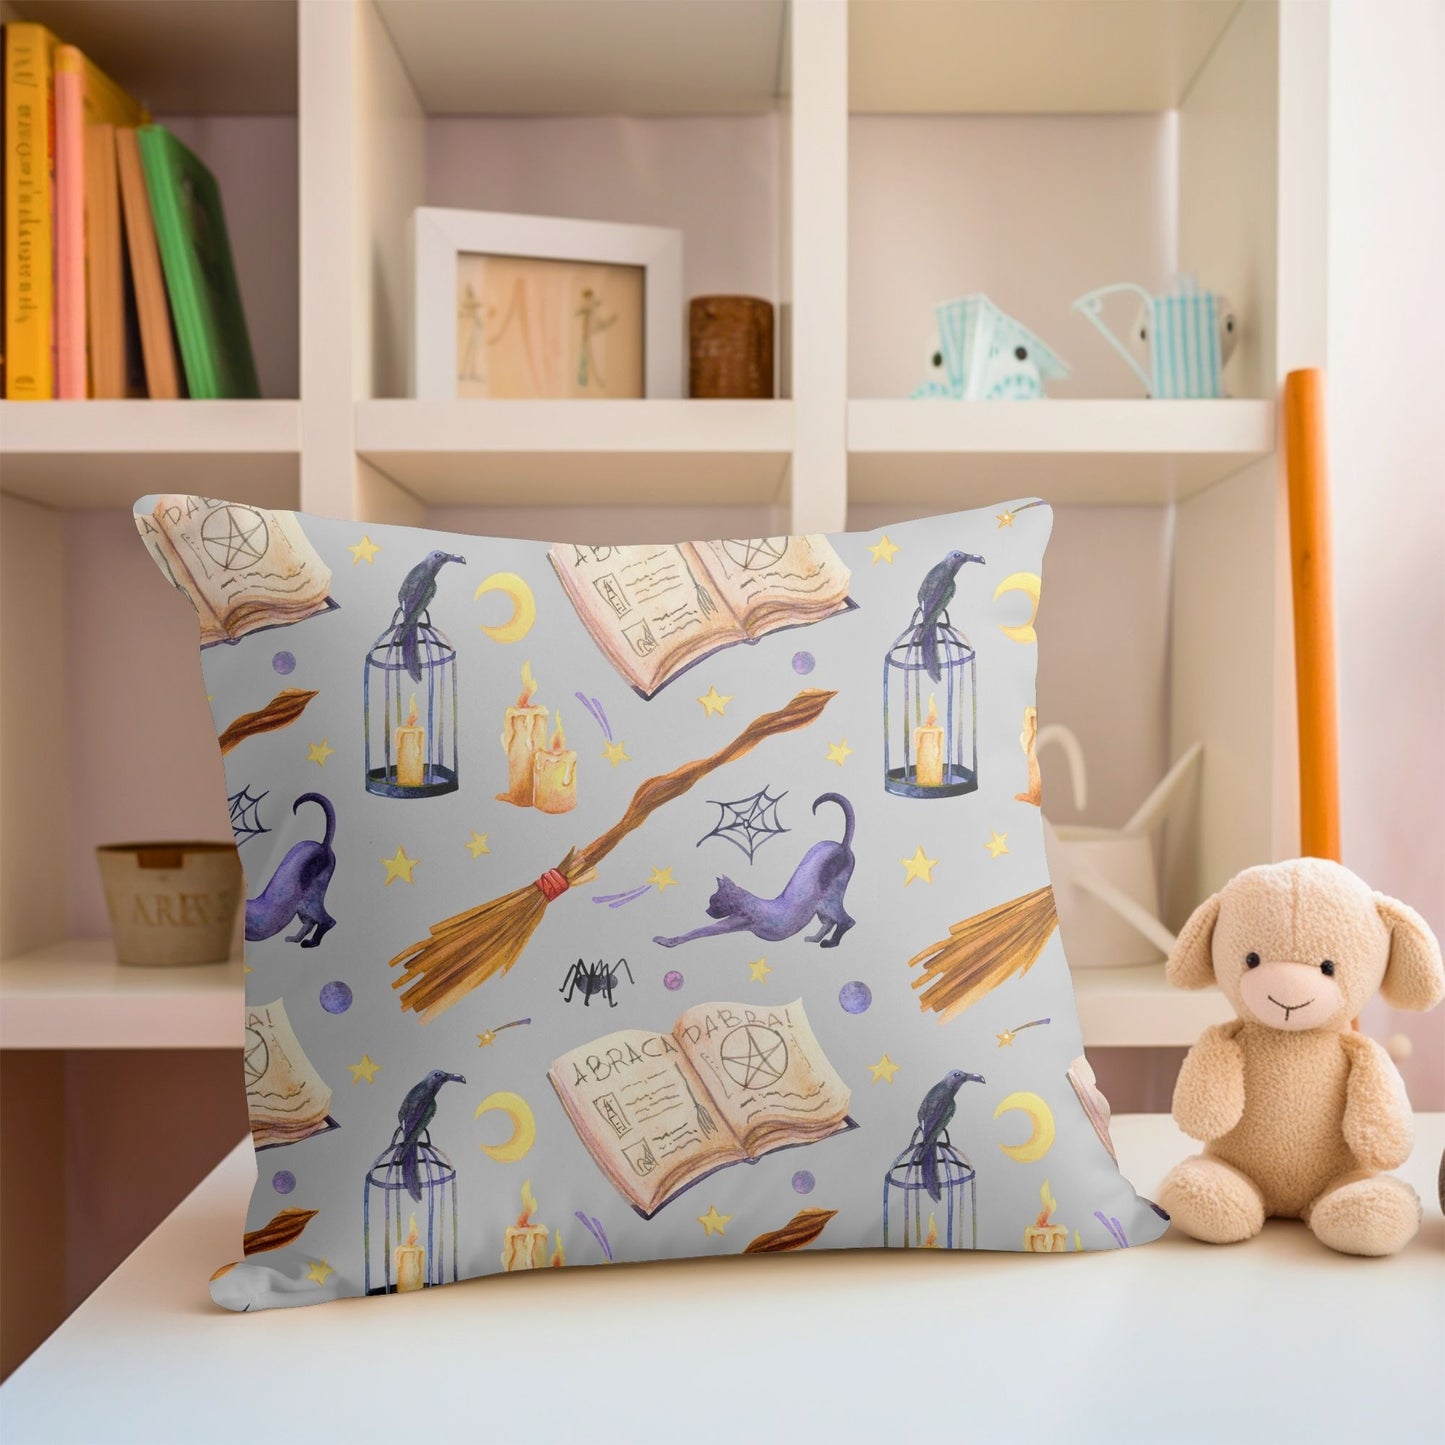 Charming kids pillow adorned with a wizarding theme for a mystical atmosphere.